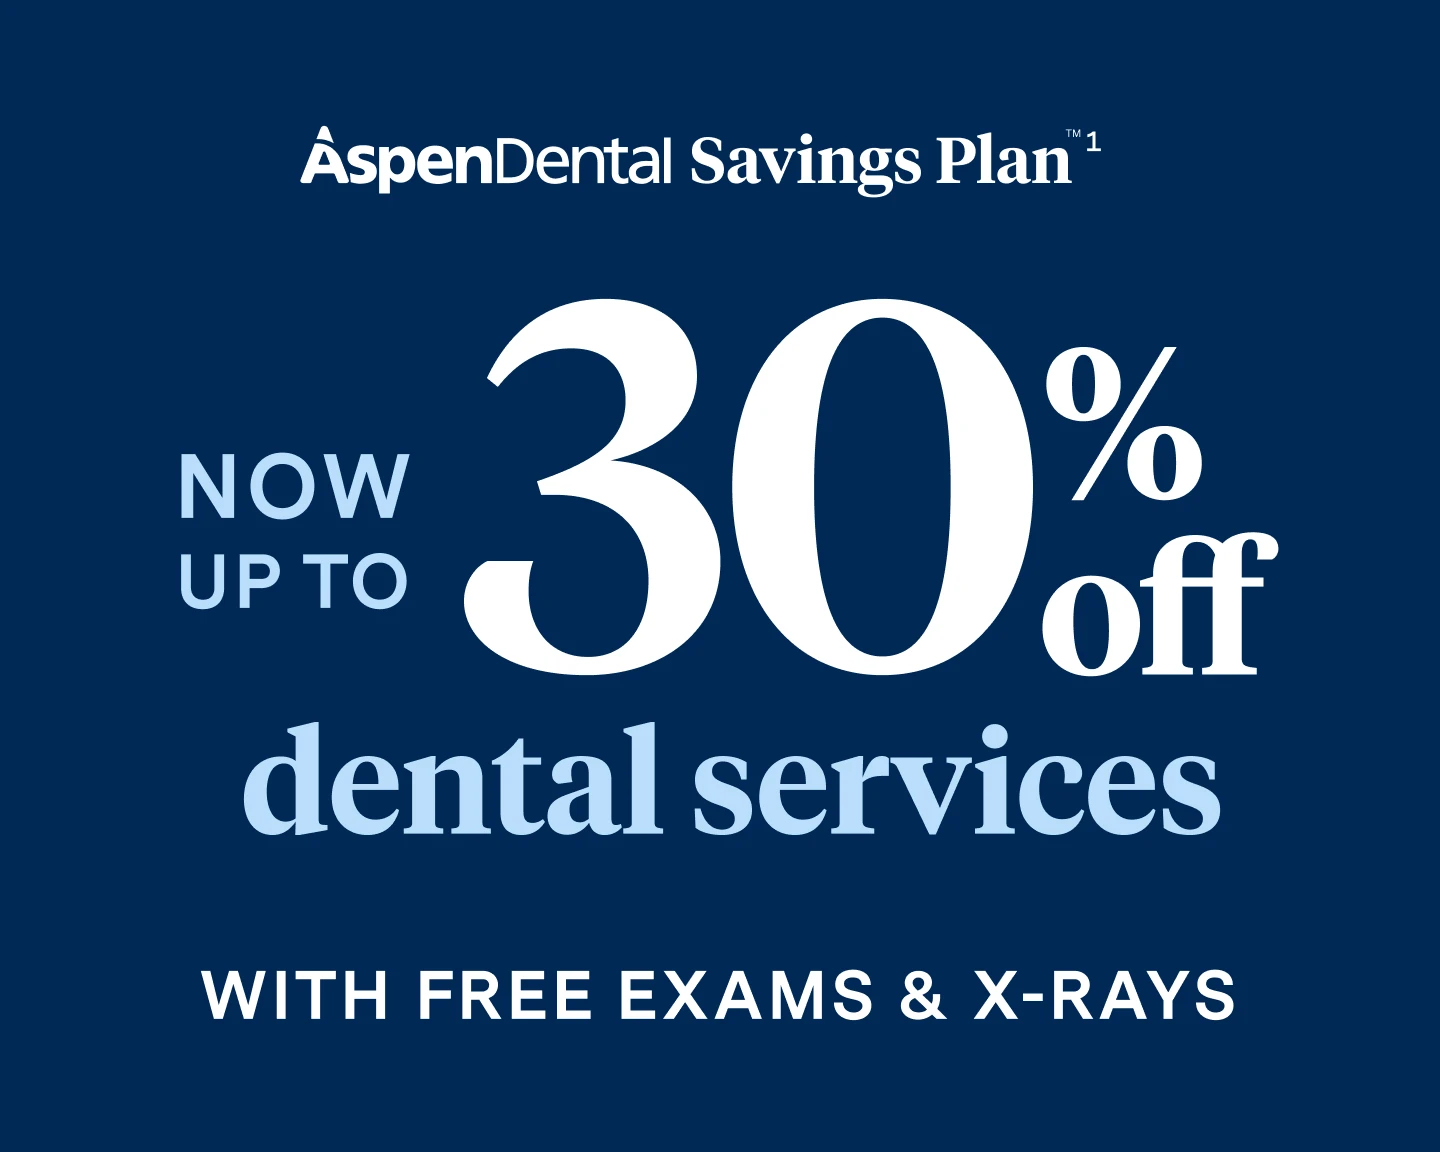 Aspen Dental Savings Plan. Up to 30% off most dental services with free exams and x-rays